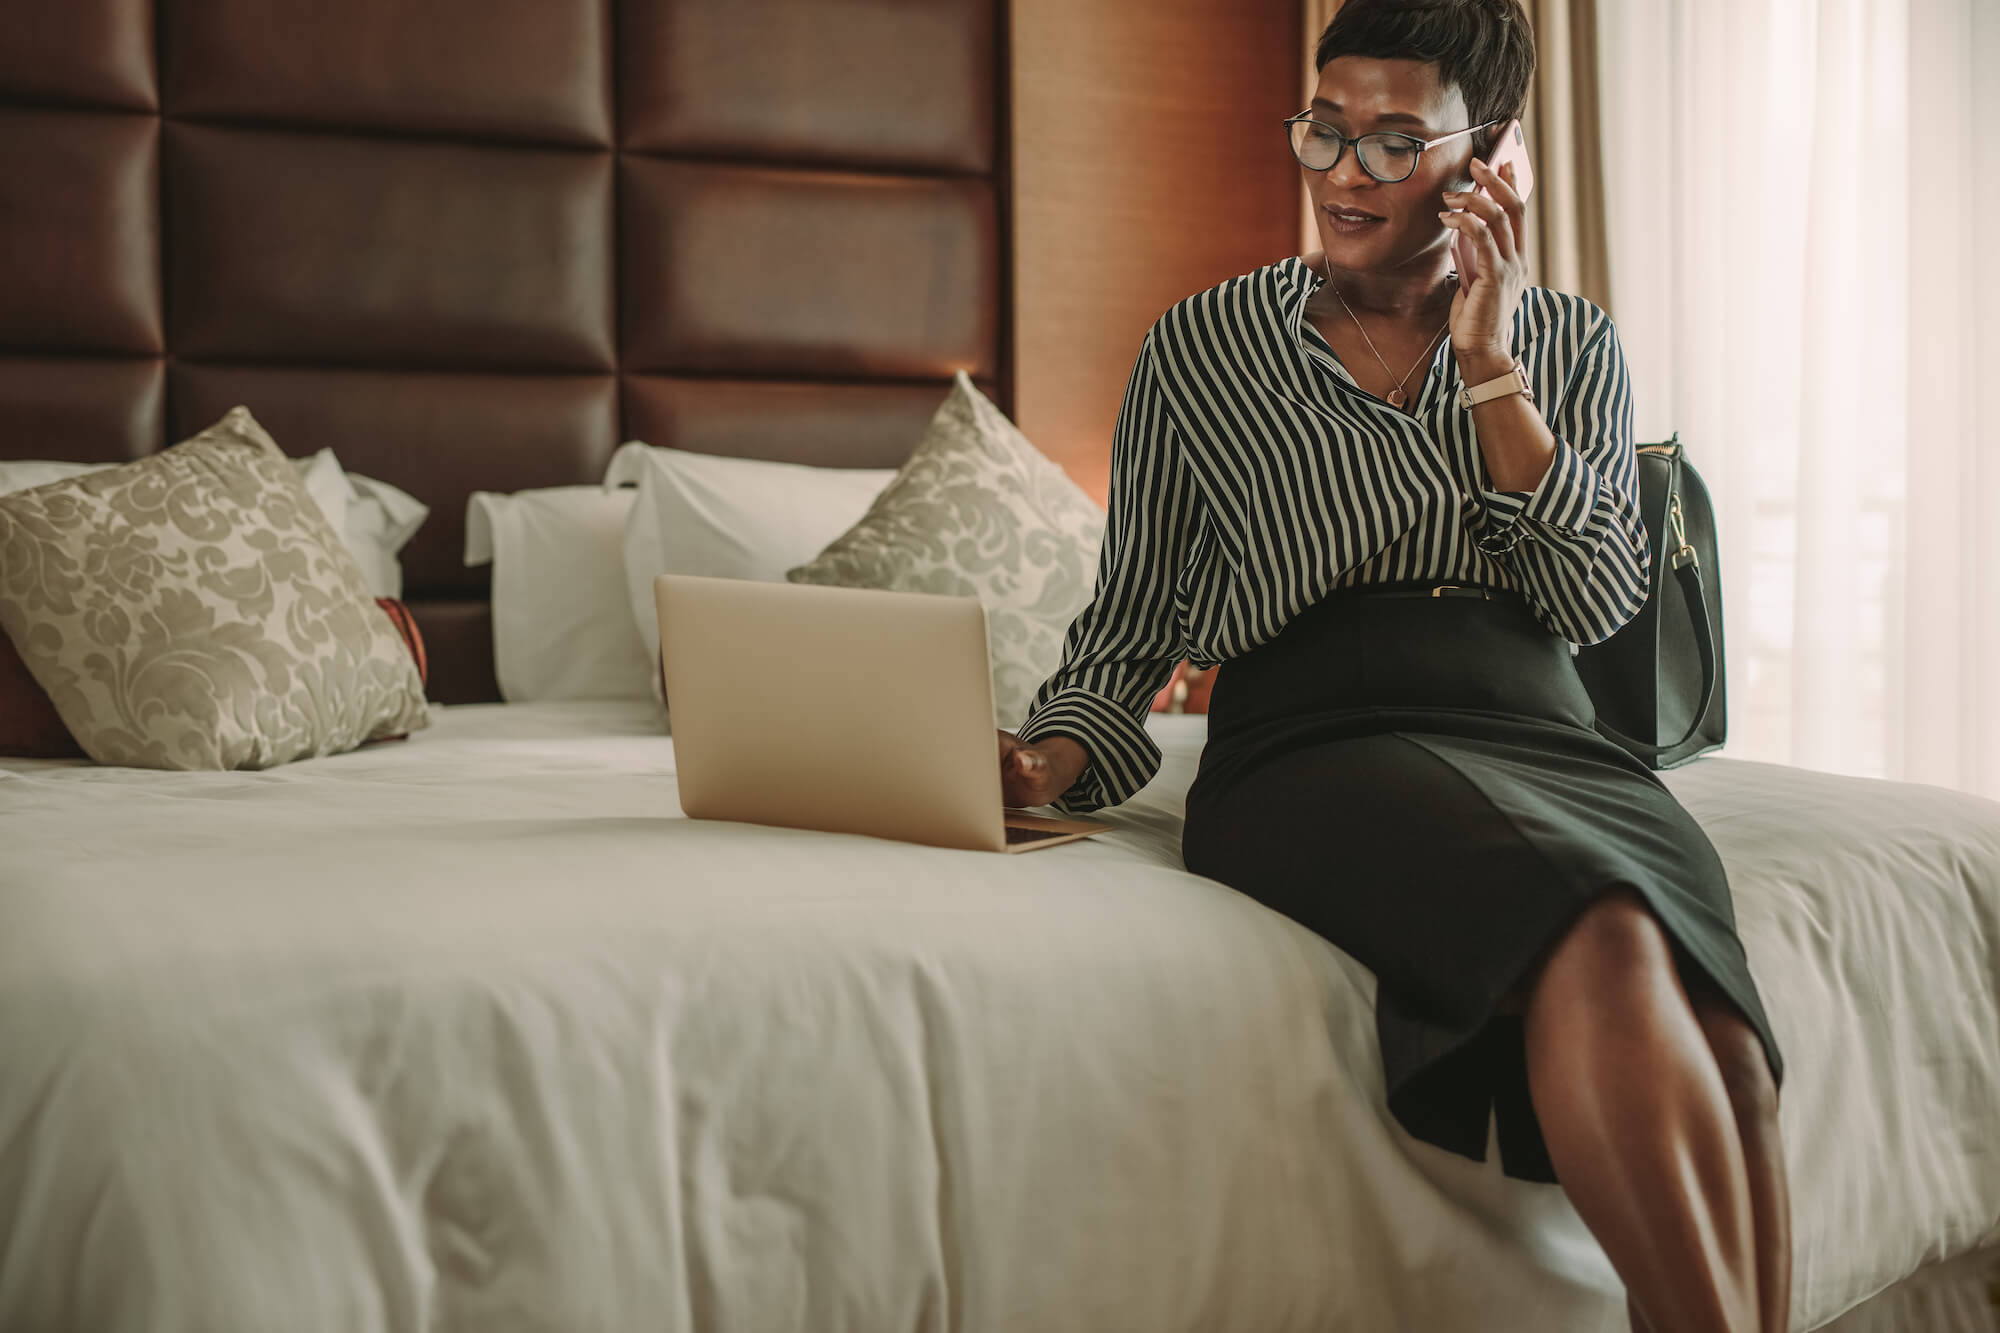 Woman in a hotel room, using the hotel's WiFi on her laptop and smartphone